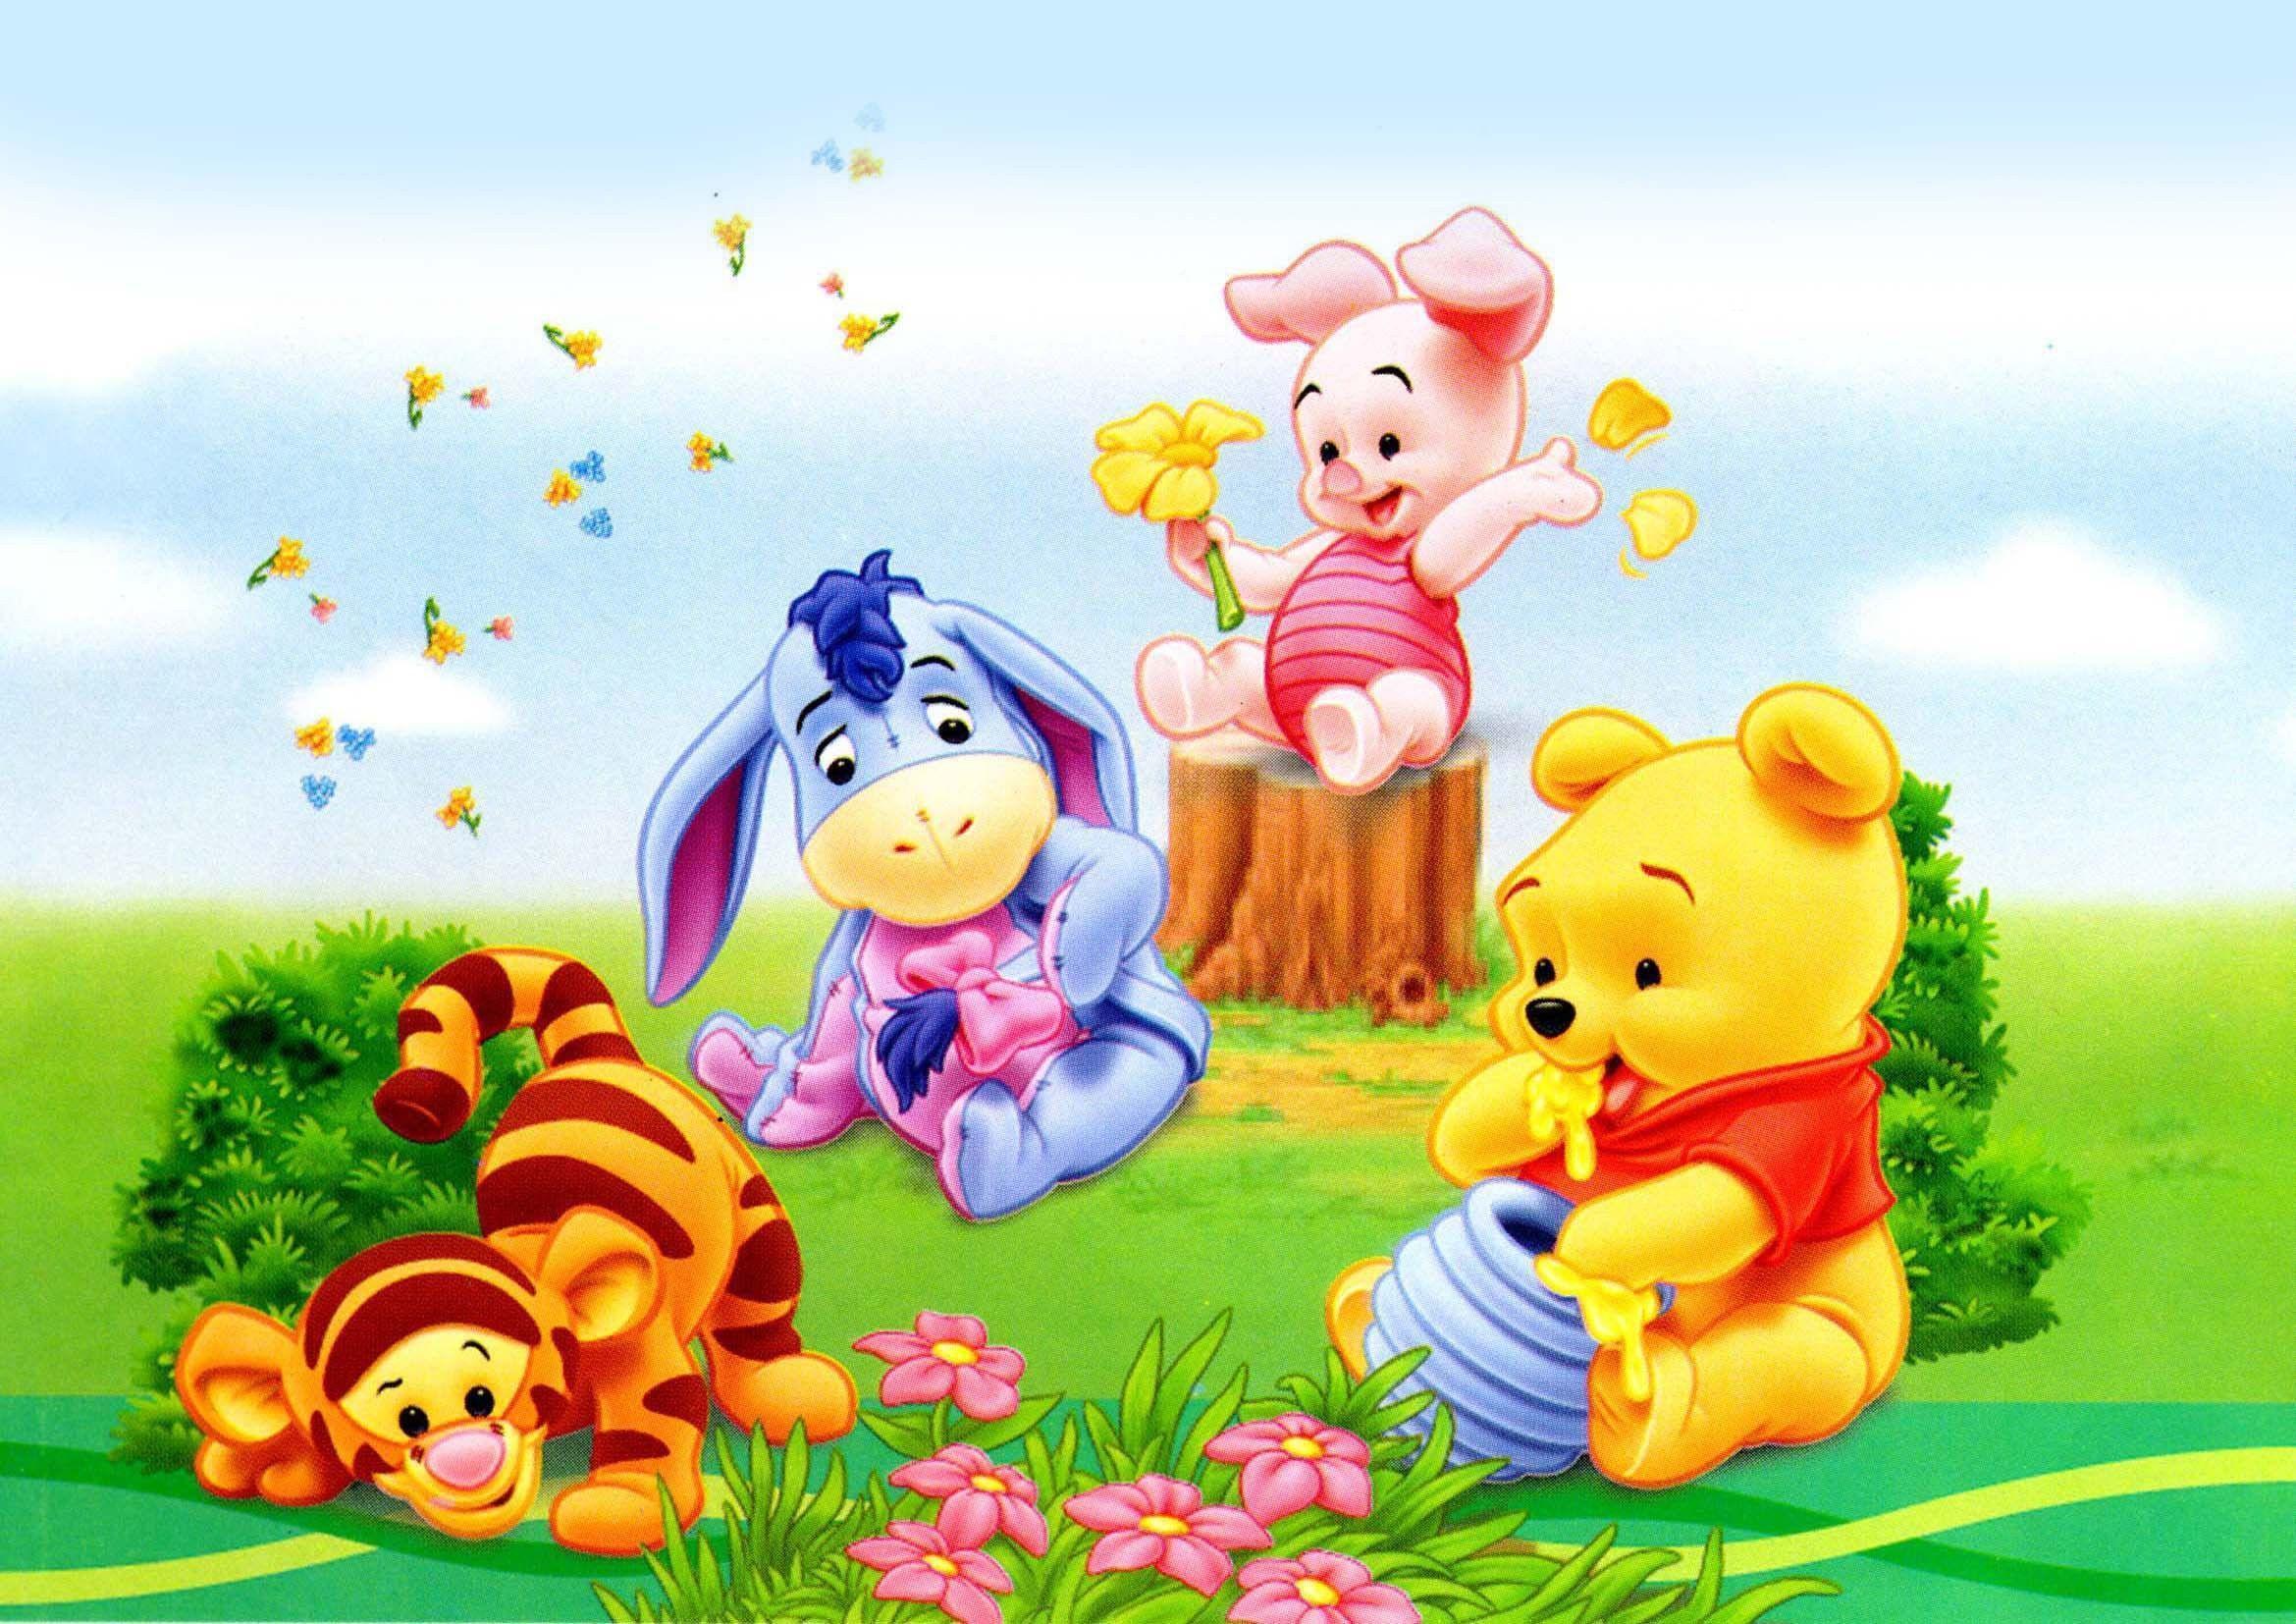 Winnie The Pooh And Friends Wallpaper 28817 HD Picture. Top